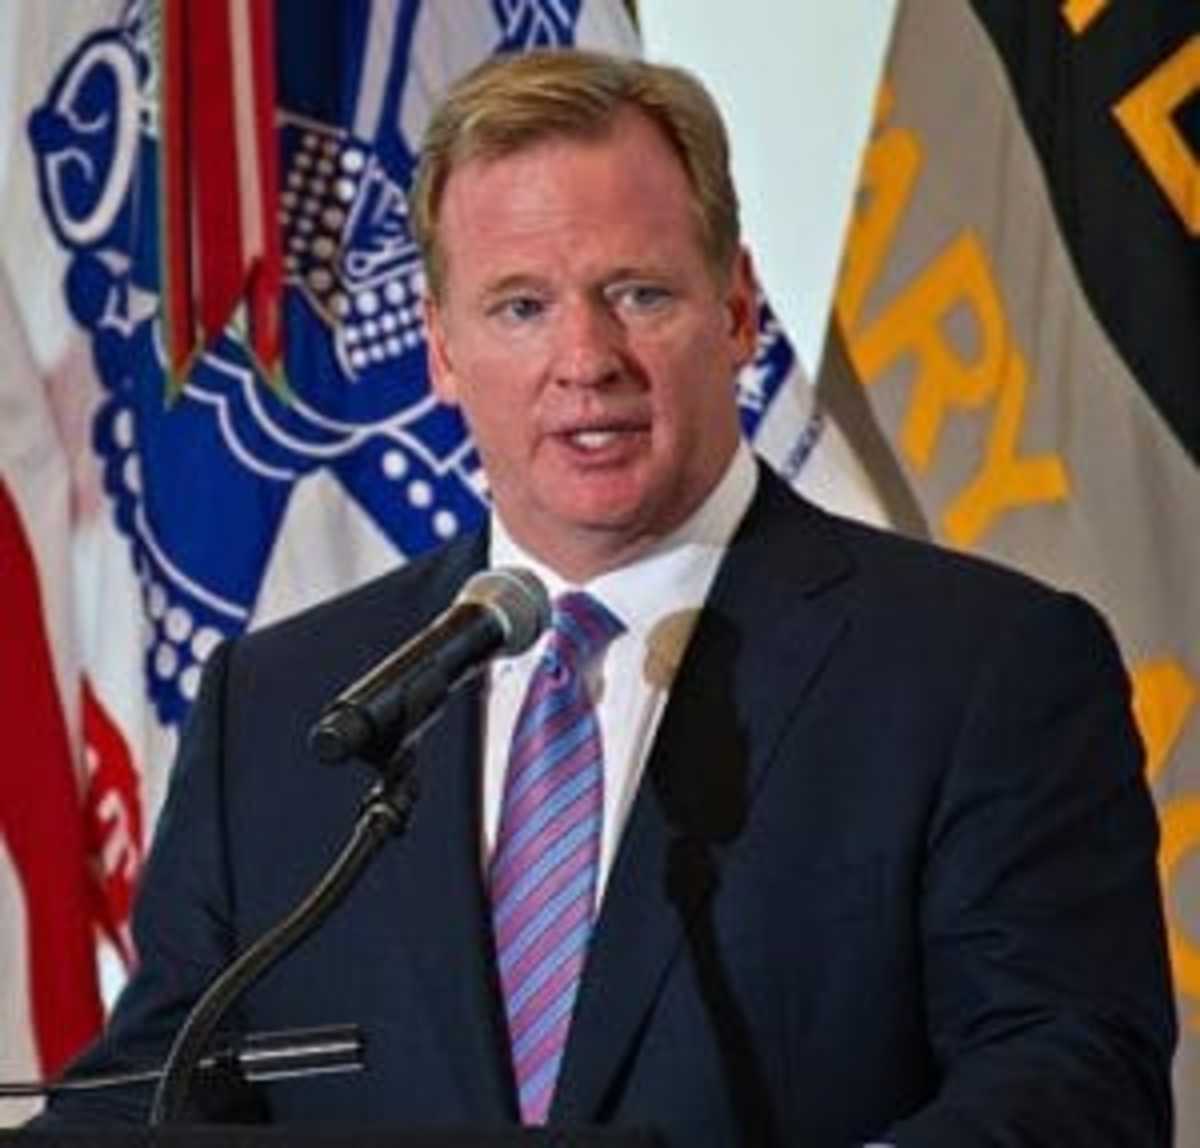 National Football League (NFL) Commissioner Roger Goodell delivers remarks during an event at the U.S. Military Academy at West Point, N.Y., launching an initiative between the Army and the NFL to work to raise awareness about traumatic brain injury Aug. 30, 2012. Goodell and U.S. Army Gen. Raymond T. Odierno, the chief of staff of the Army, jointly signed a letter formalizing the initiative during the event. (U.S. Army photo by Staff Sgt. Teddy Wade/Released)